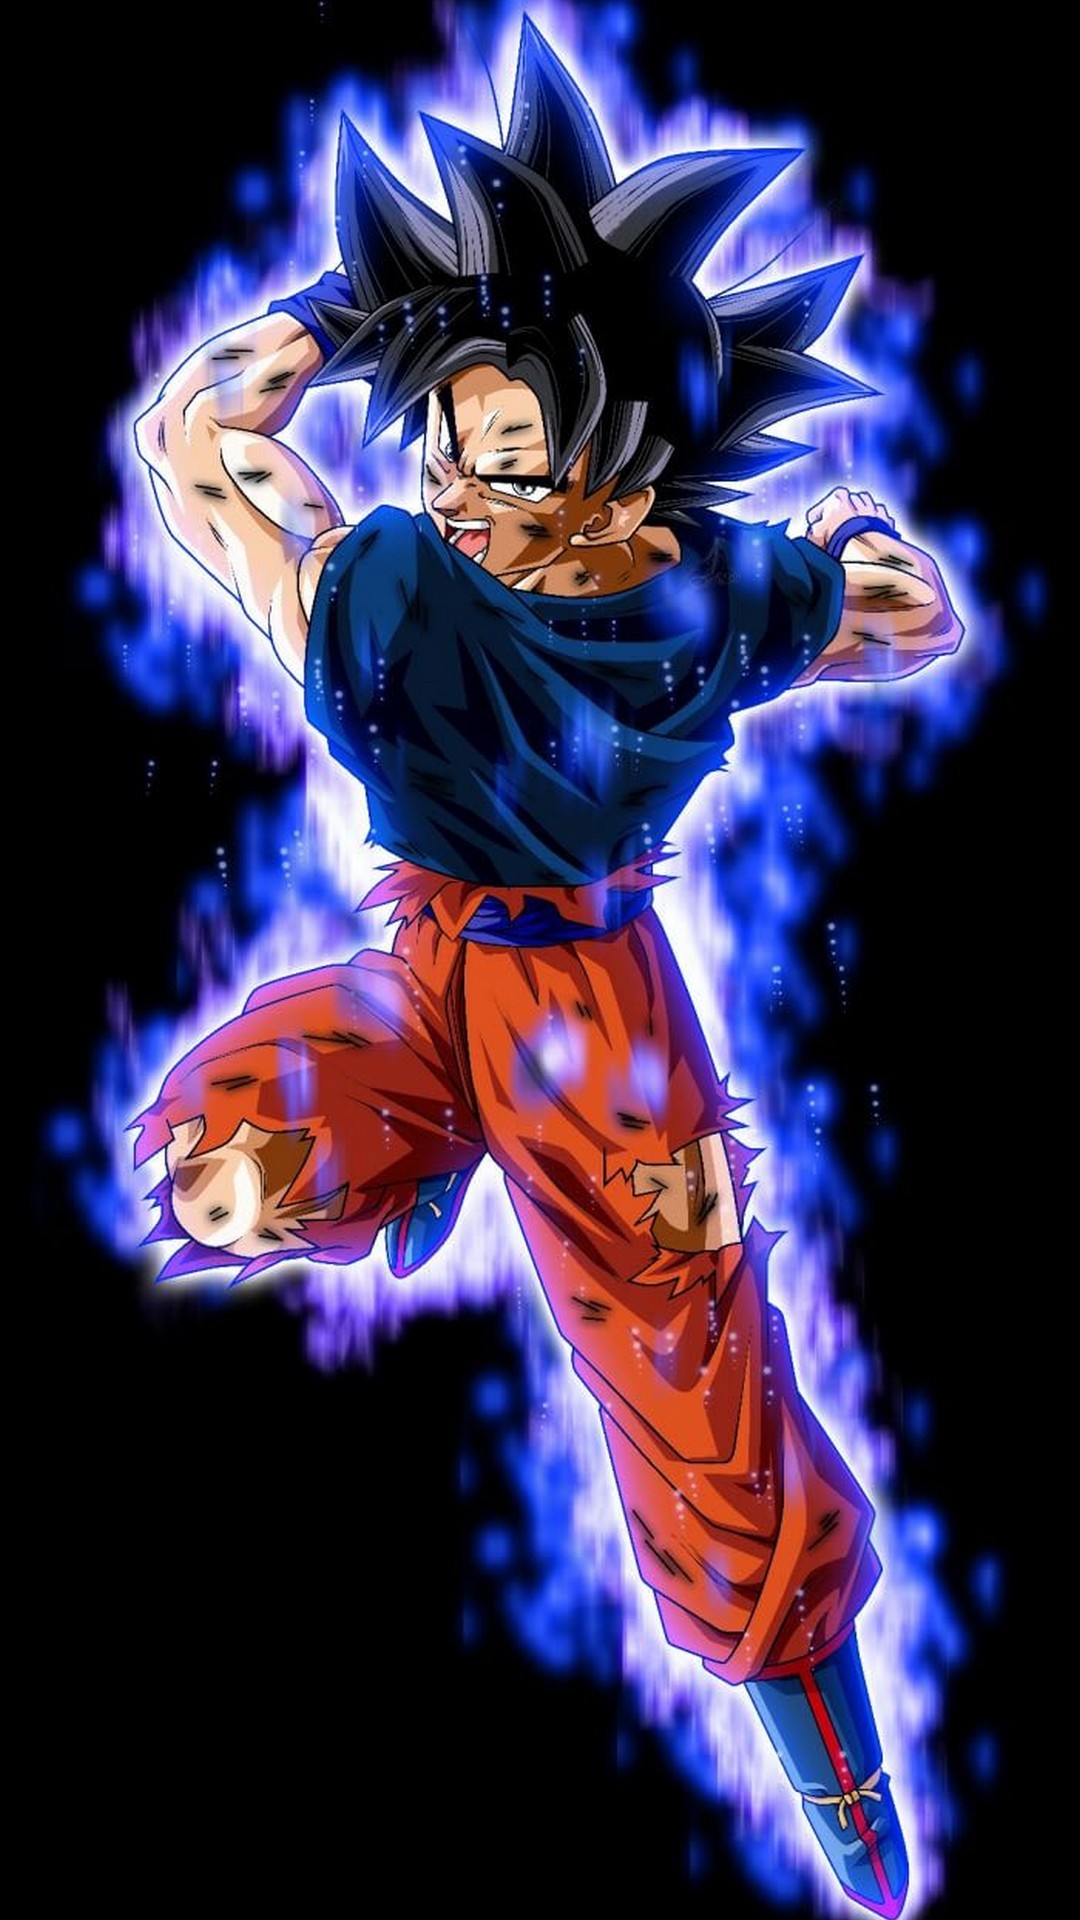 Goku Imagenes Wallpaper iPhone with resolution 1080X1920 pixel. You can make this wallpaper for your iPhone 5, 6, 7, 8, X backgrounds, Mobile Screensaver, or iPad Lock Screen